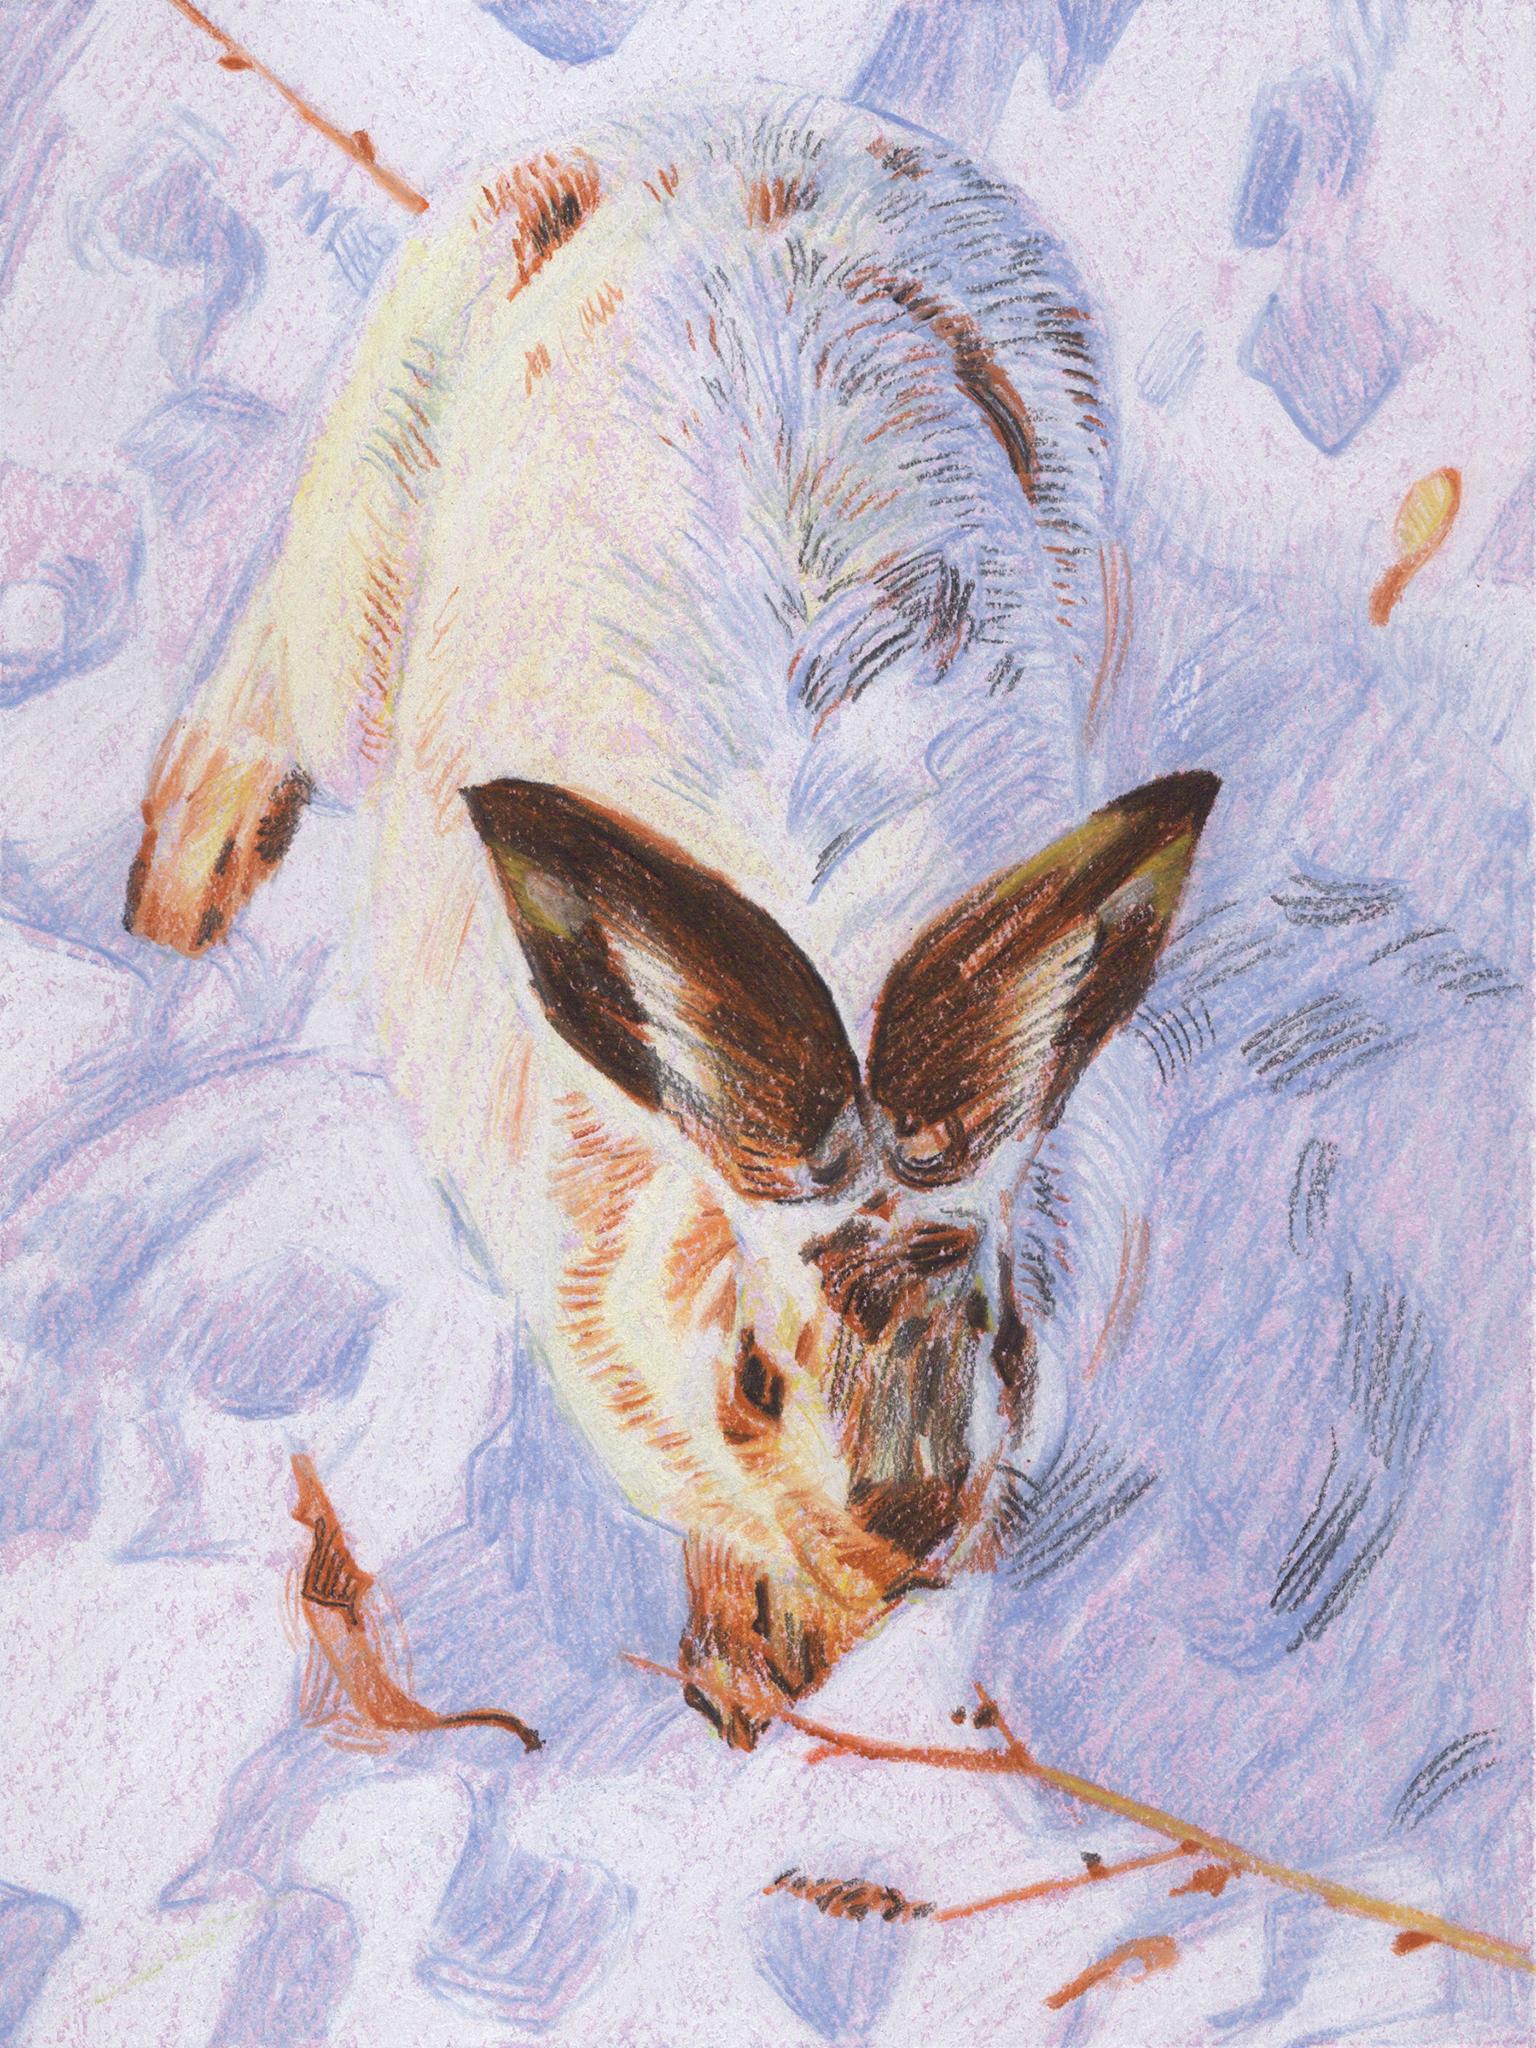 Canadian Contemporary Art by Christian Frederiksen - Wintery Hare